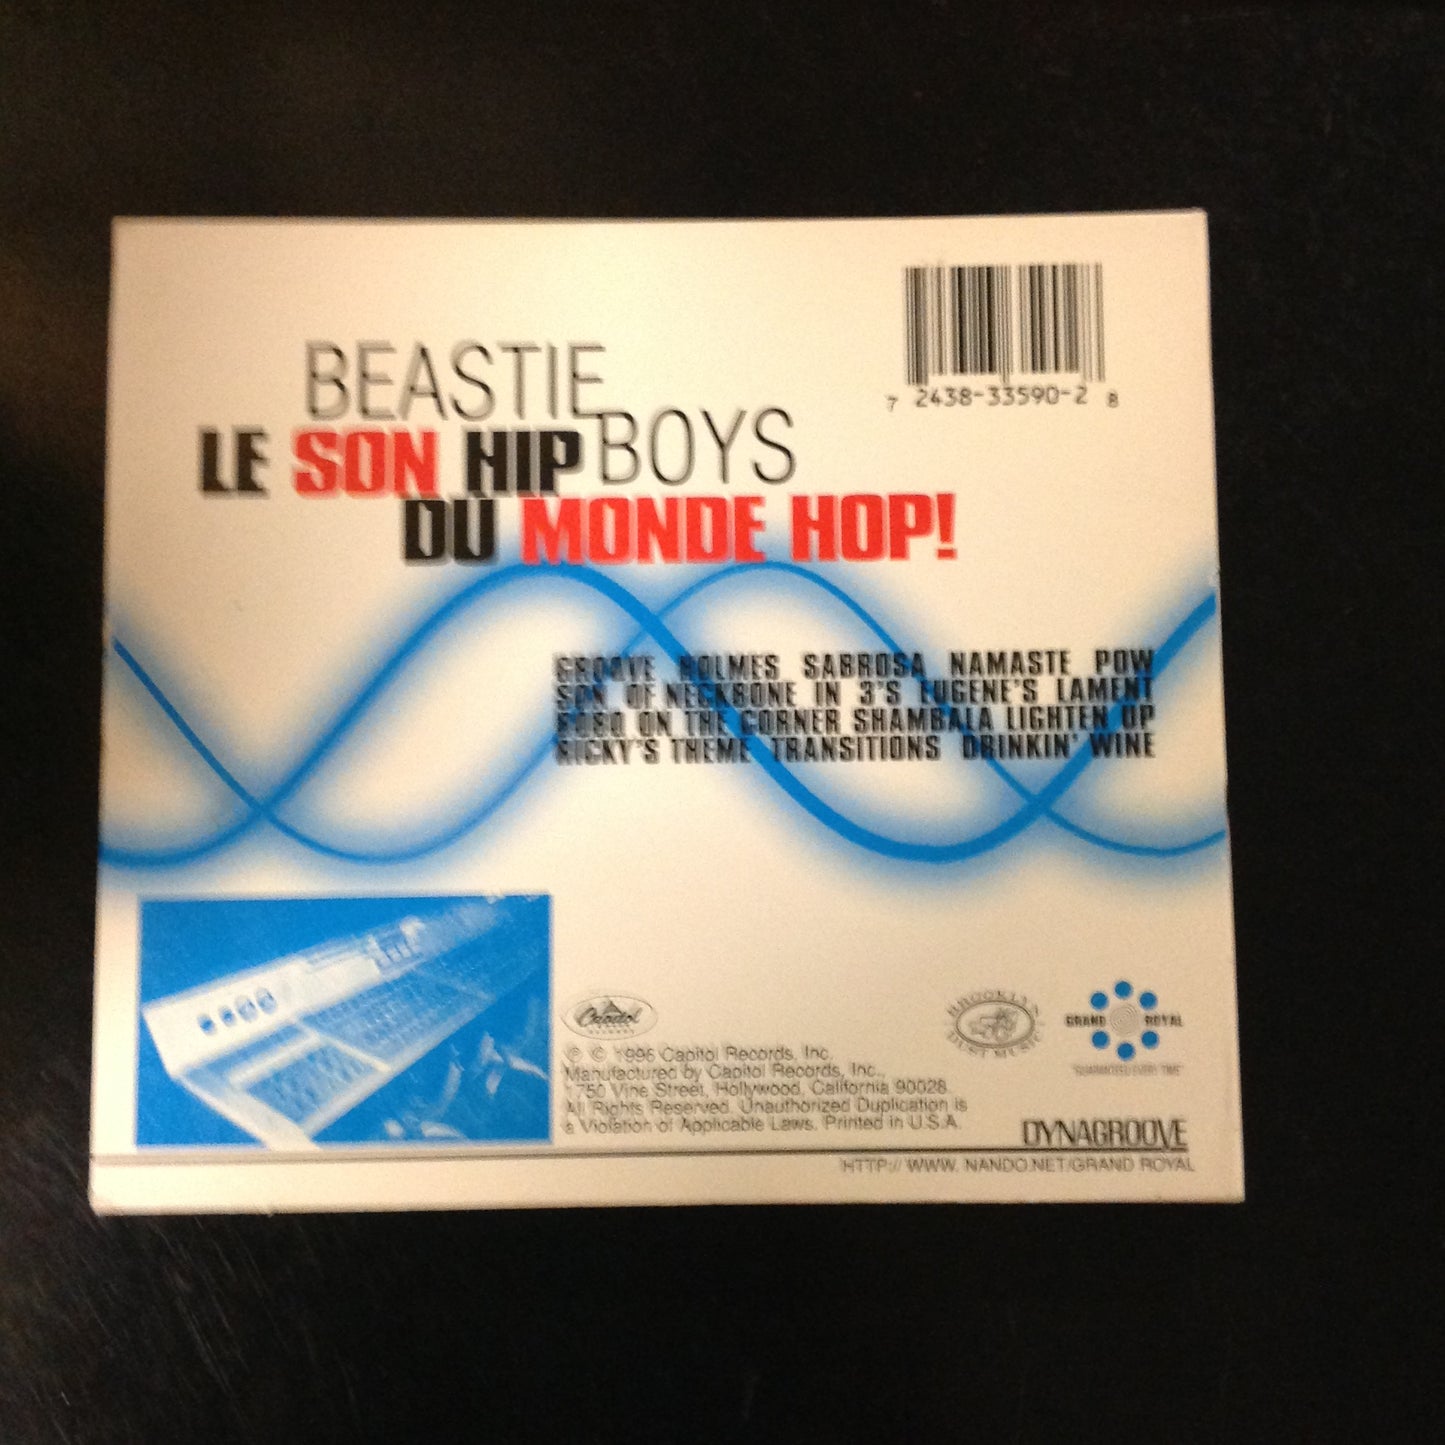 CD The Beastie Boys The Sound From Way Out! Capitol CDP724383359028